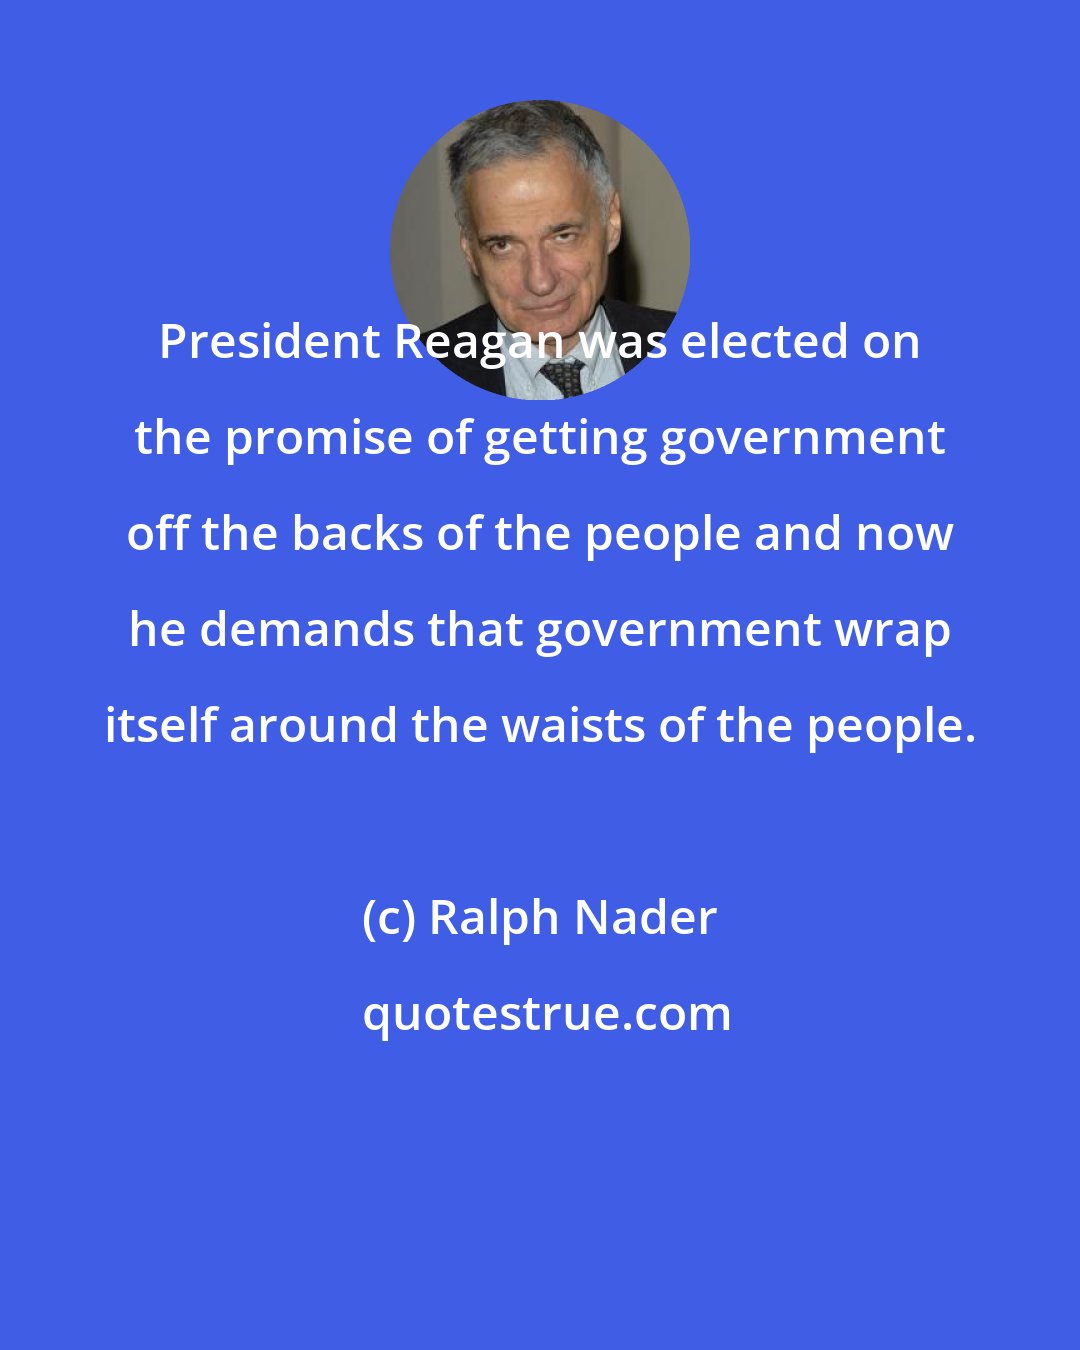 Ralph Nader: President Reagan was elected on the promise of getting government off the backs of the people and now he demands that government wrap itself around the waists of the people.